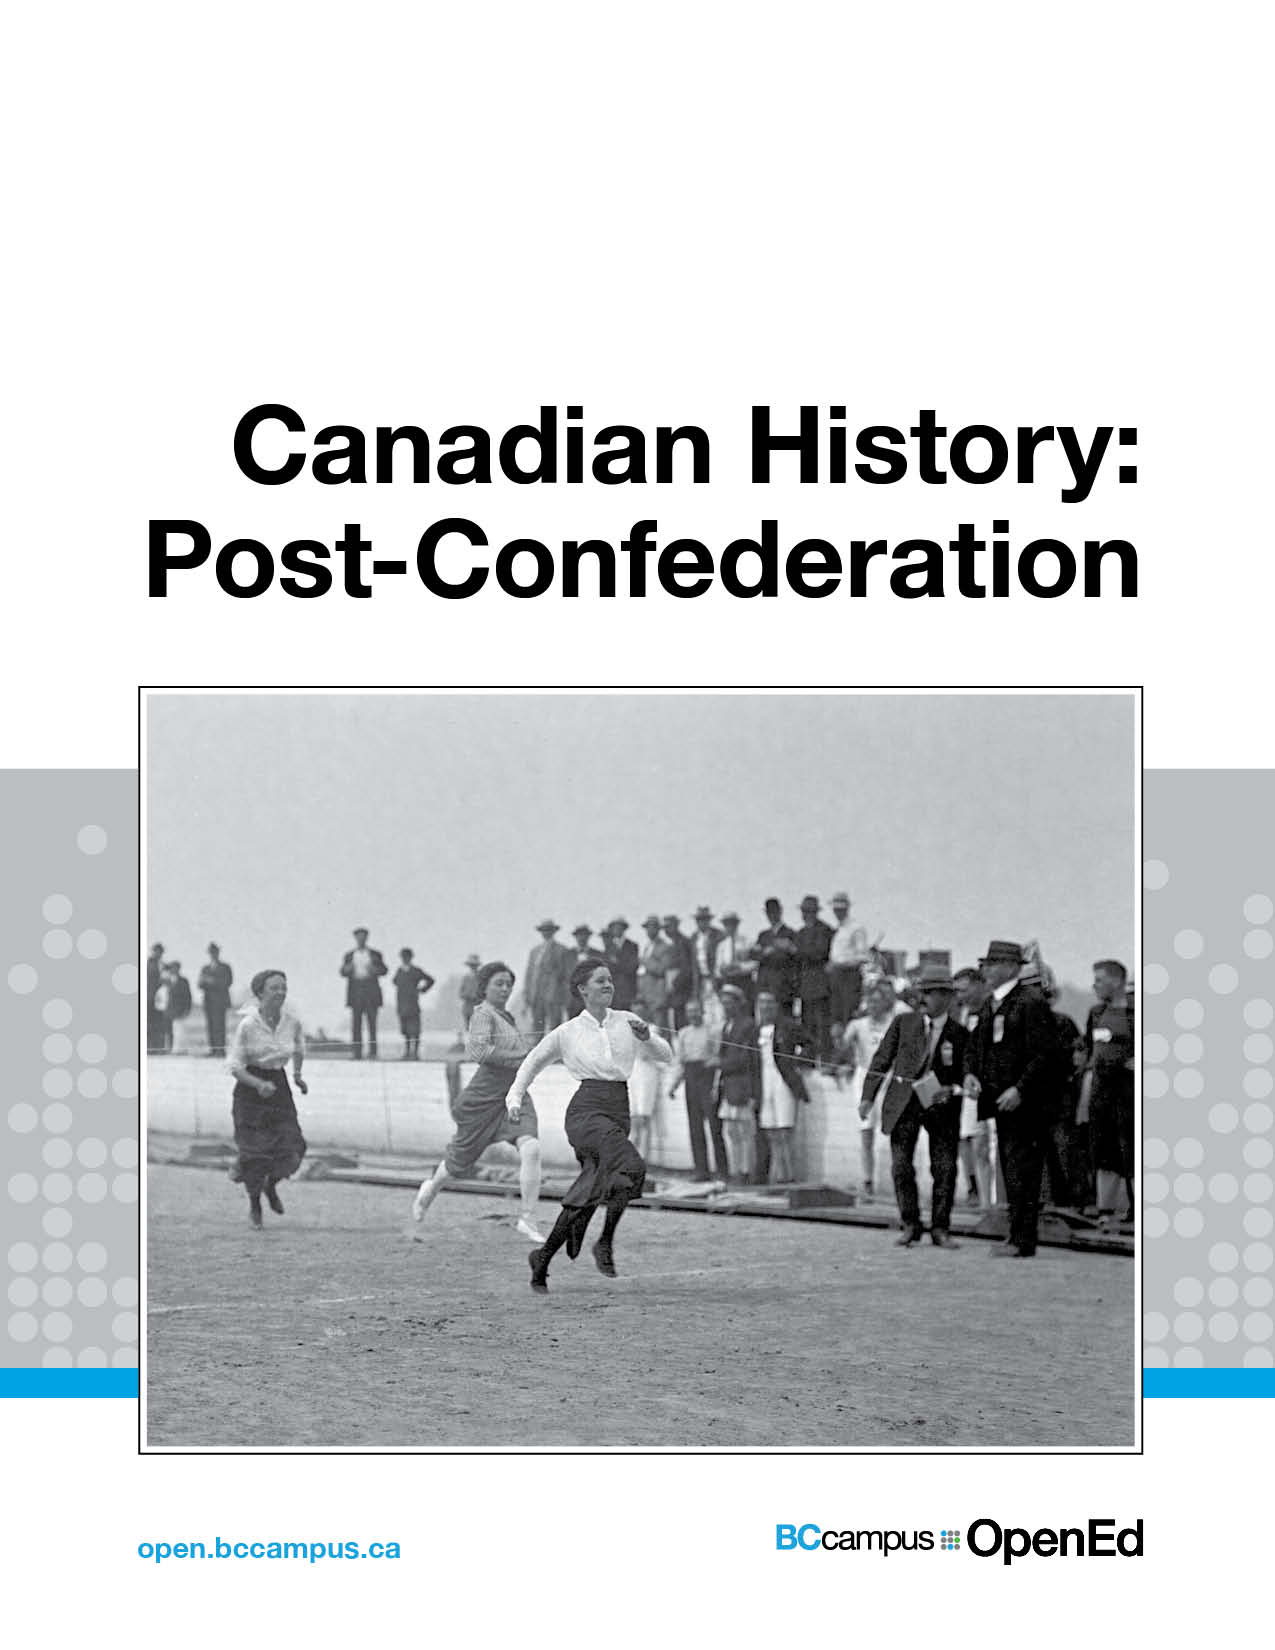 Cover image for Canadian History: Post-Confederation, a black and white image of runners and spectators